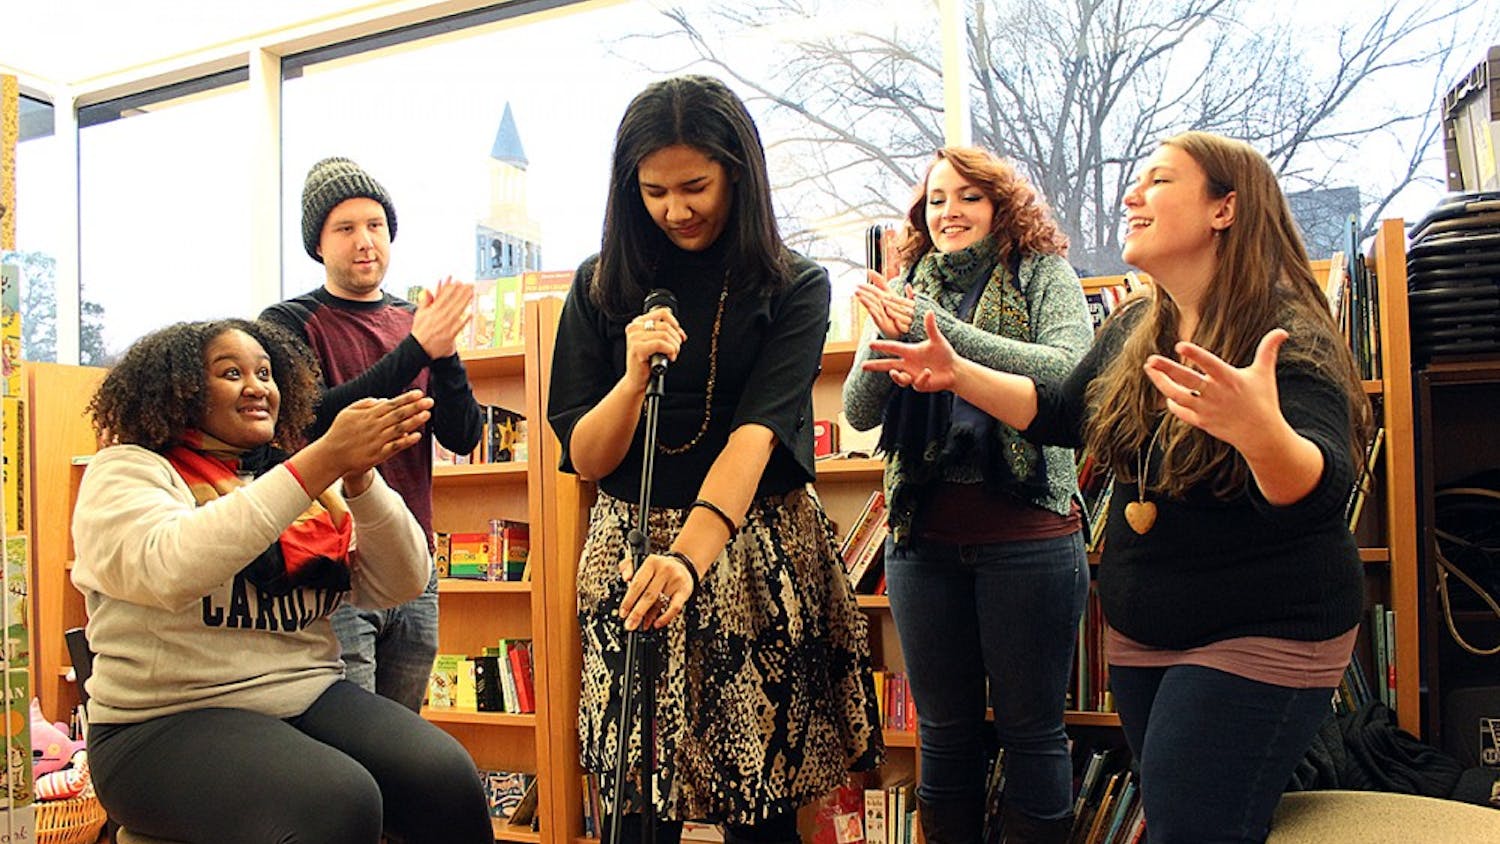 UNC Wordsmiths Mariah Monsanto, Wil Broadwell, Lauren Bullock, Polina Bastrakova, and Julia McKeown, pictured on Thursday in Bulls Head Bookshop, are getting ready for a Grand Slam on Saturday night. Bullock approaches the mic as her teammates support her.